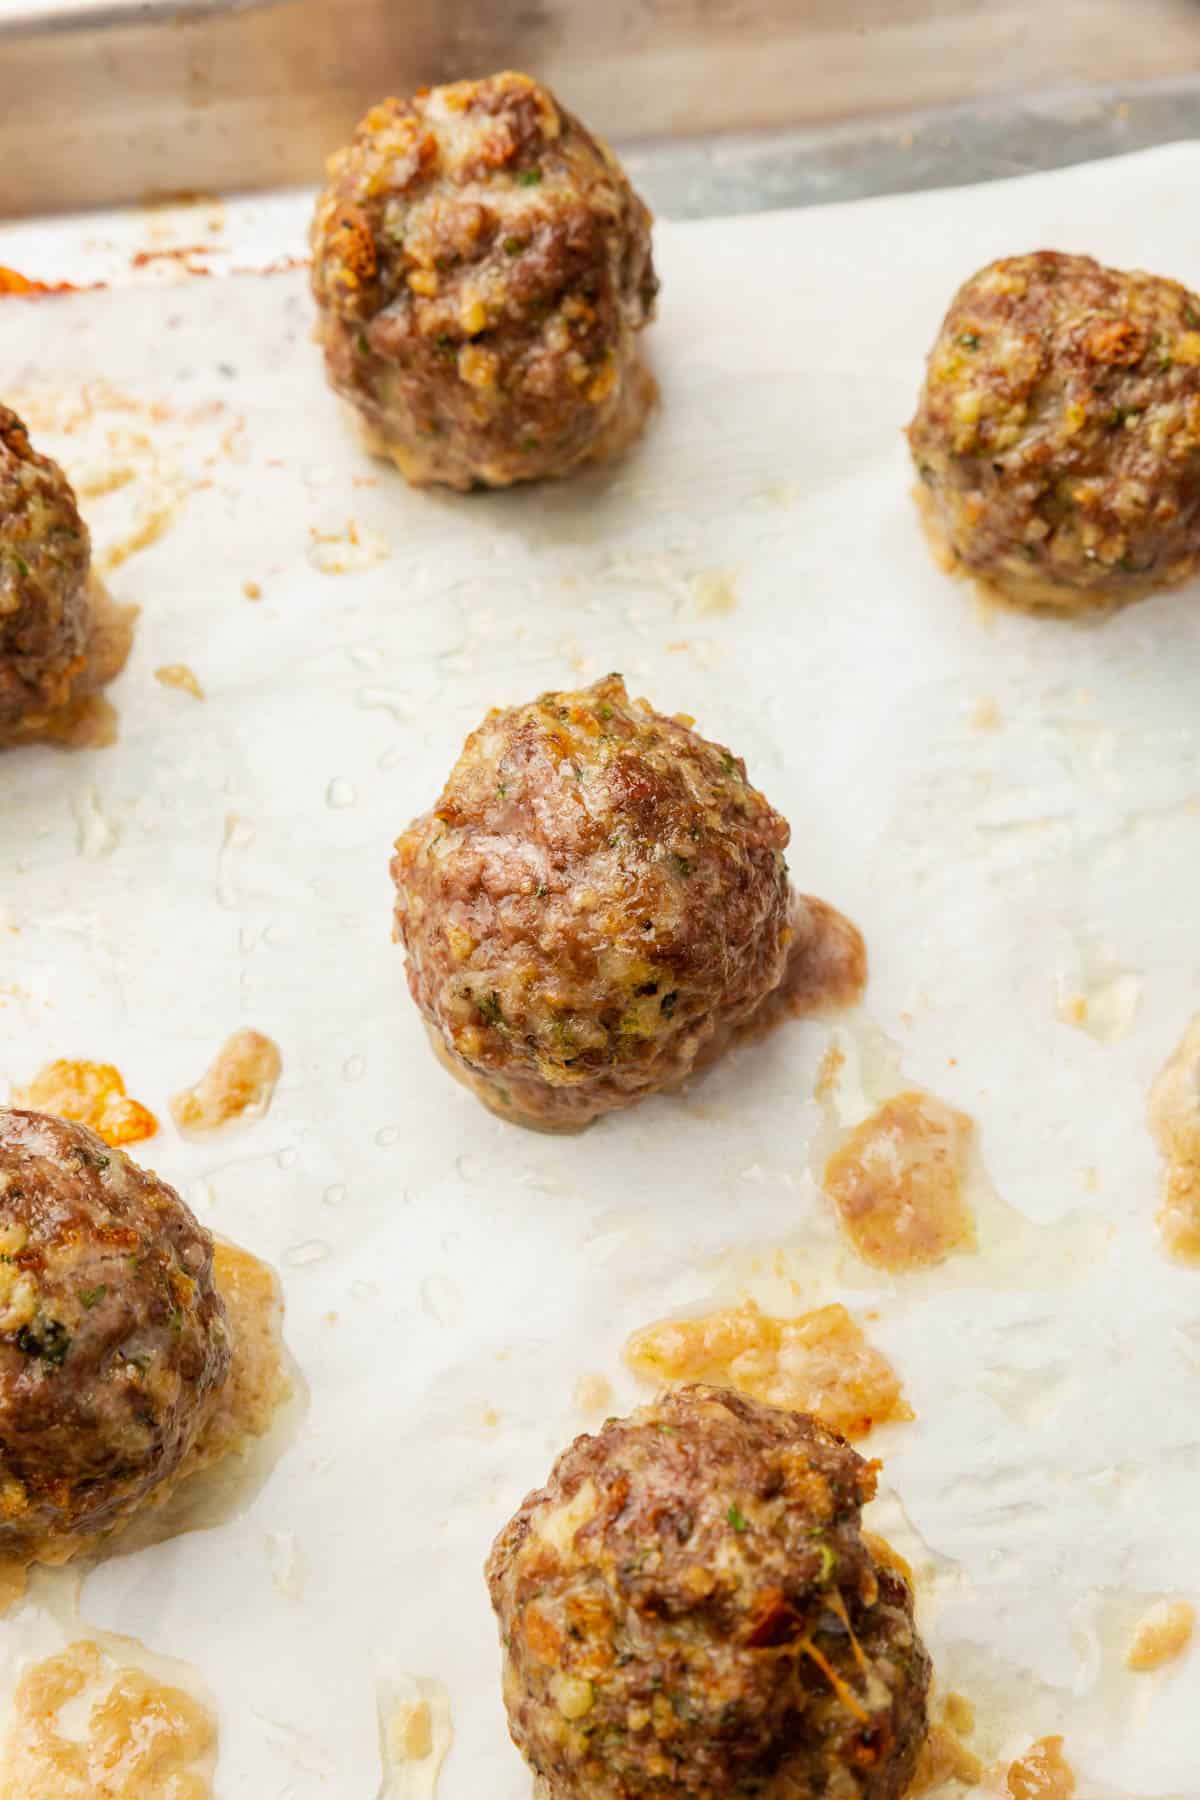 Cooked gluten-free meatballs on a sheet pan lined with parchment paper.